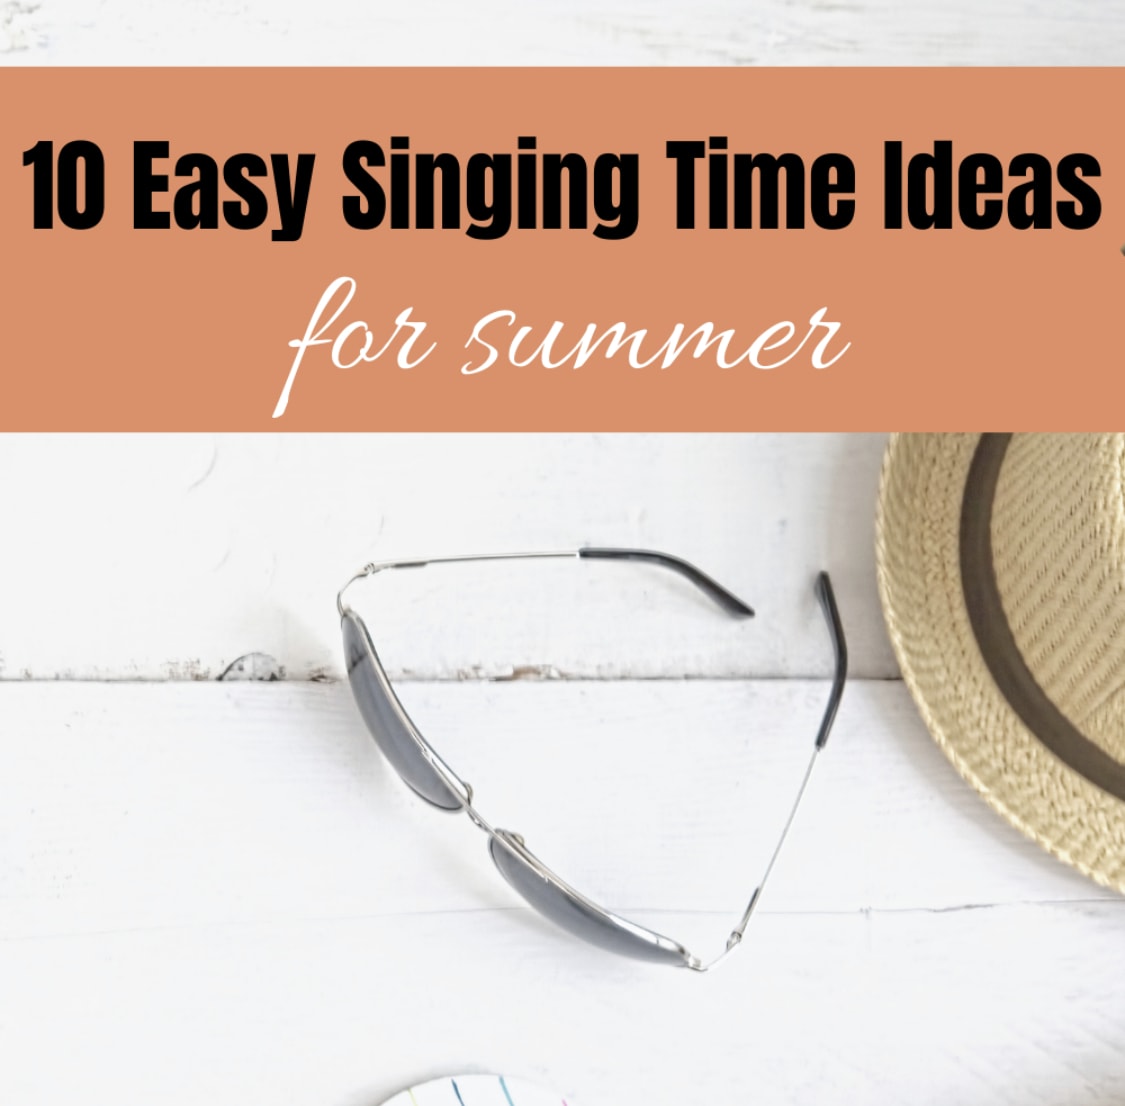 Summer Singing Time Ideas